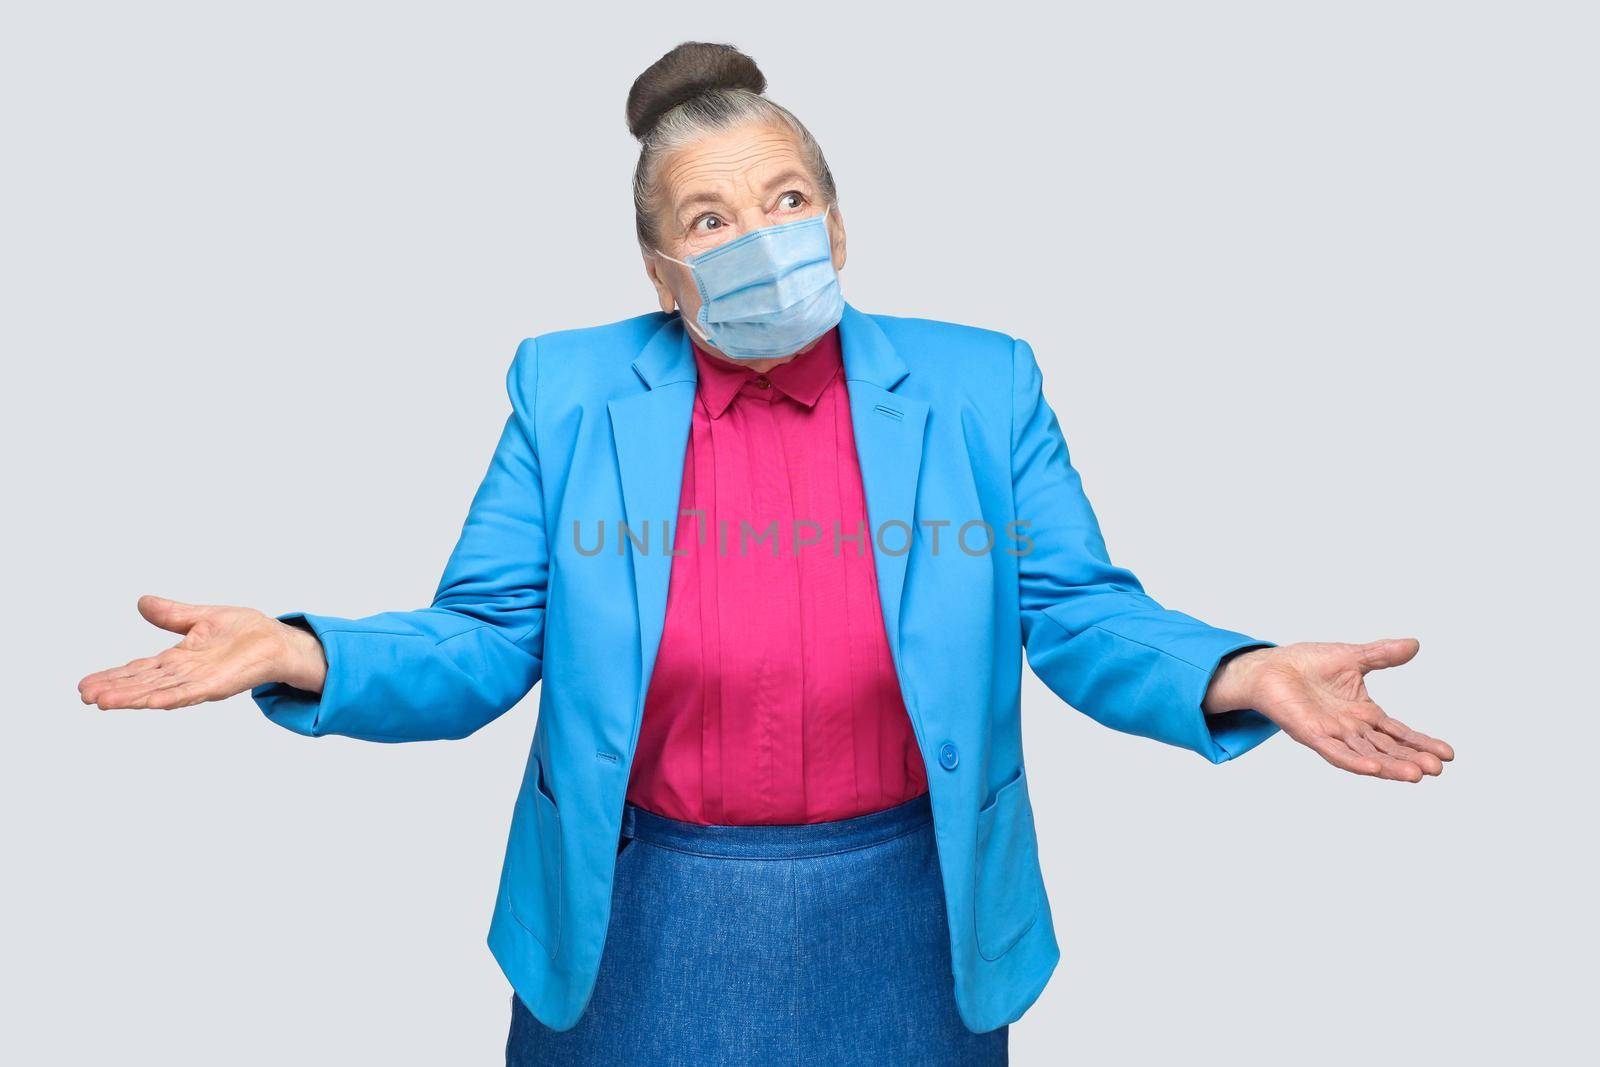 Puzzled or confused old woman with surgical medical mask, raised arms. grandmother with light blue suit and pink shirt standing with collected bun gray hair. indoor shot, isolated on gray background